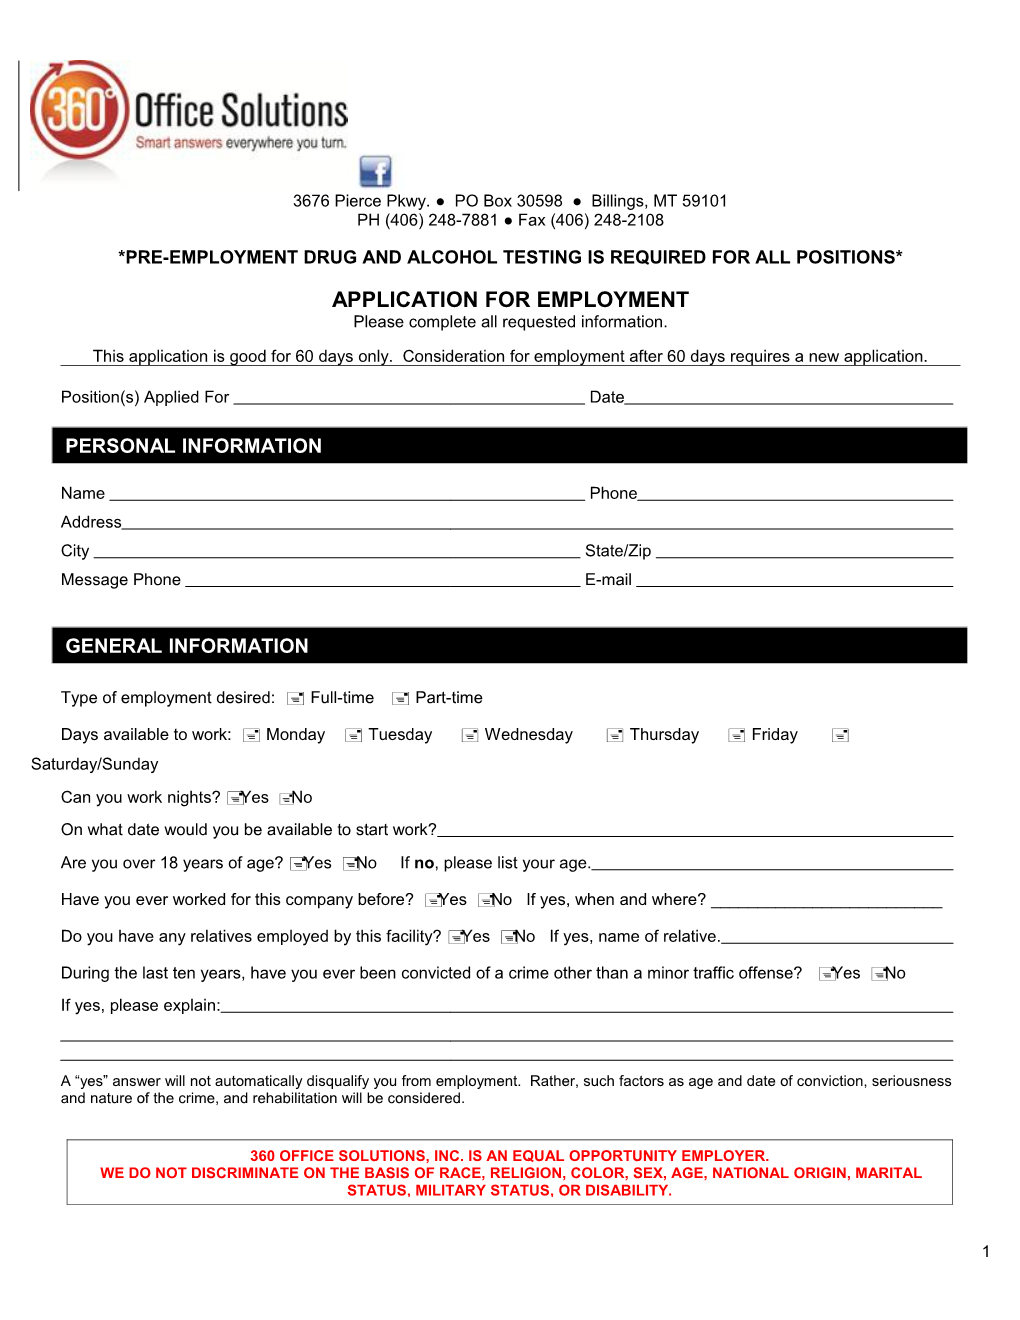 Application for Employment s177